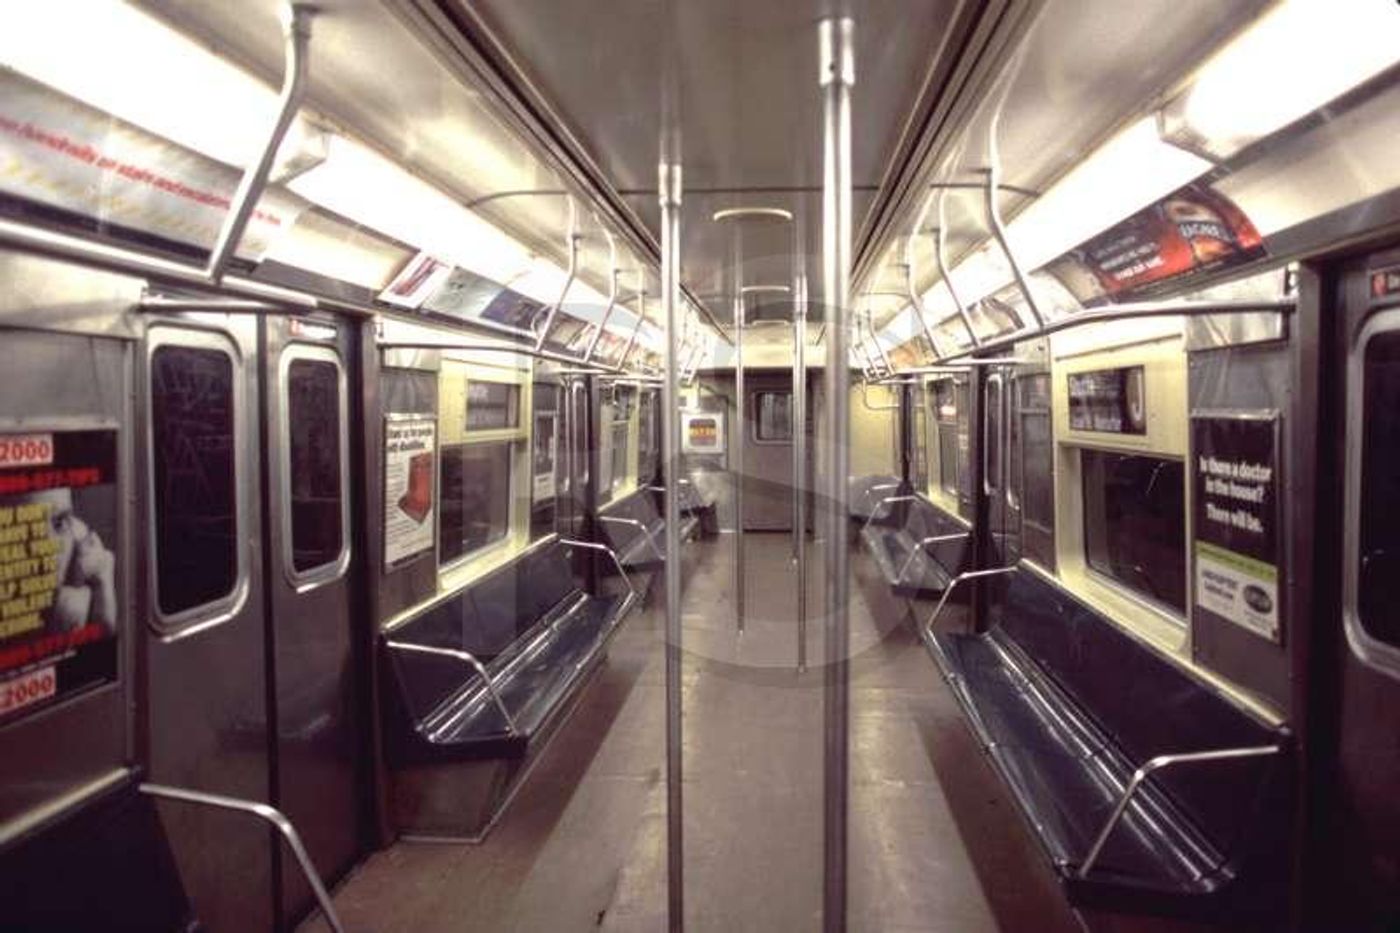 A new survey identified subway-dwelling microbes.